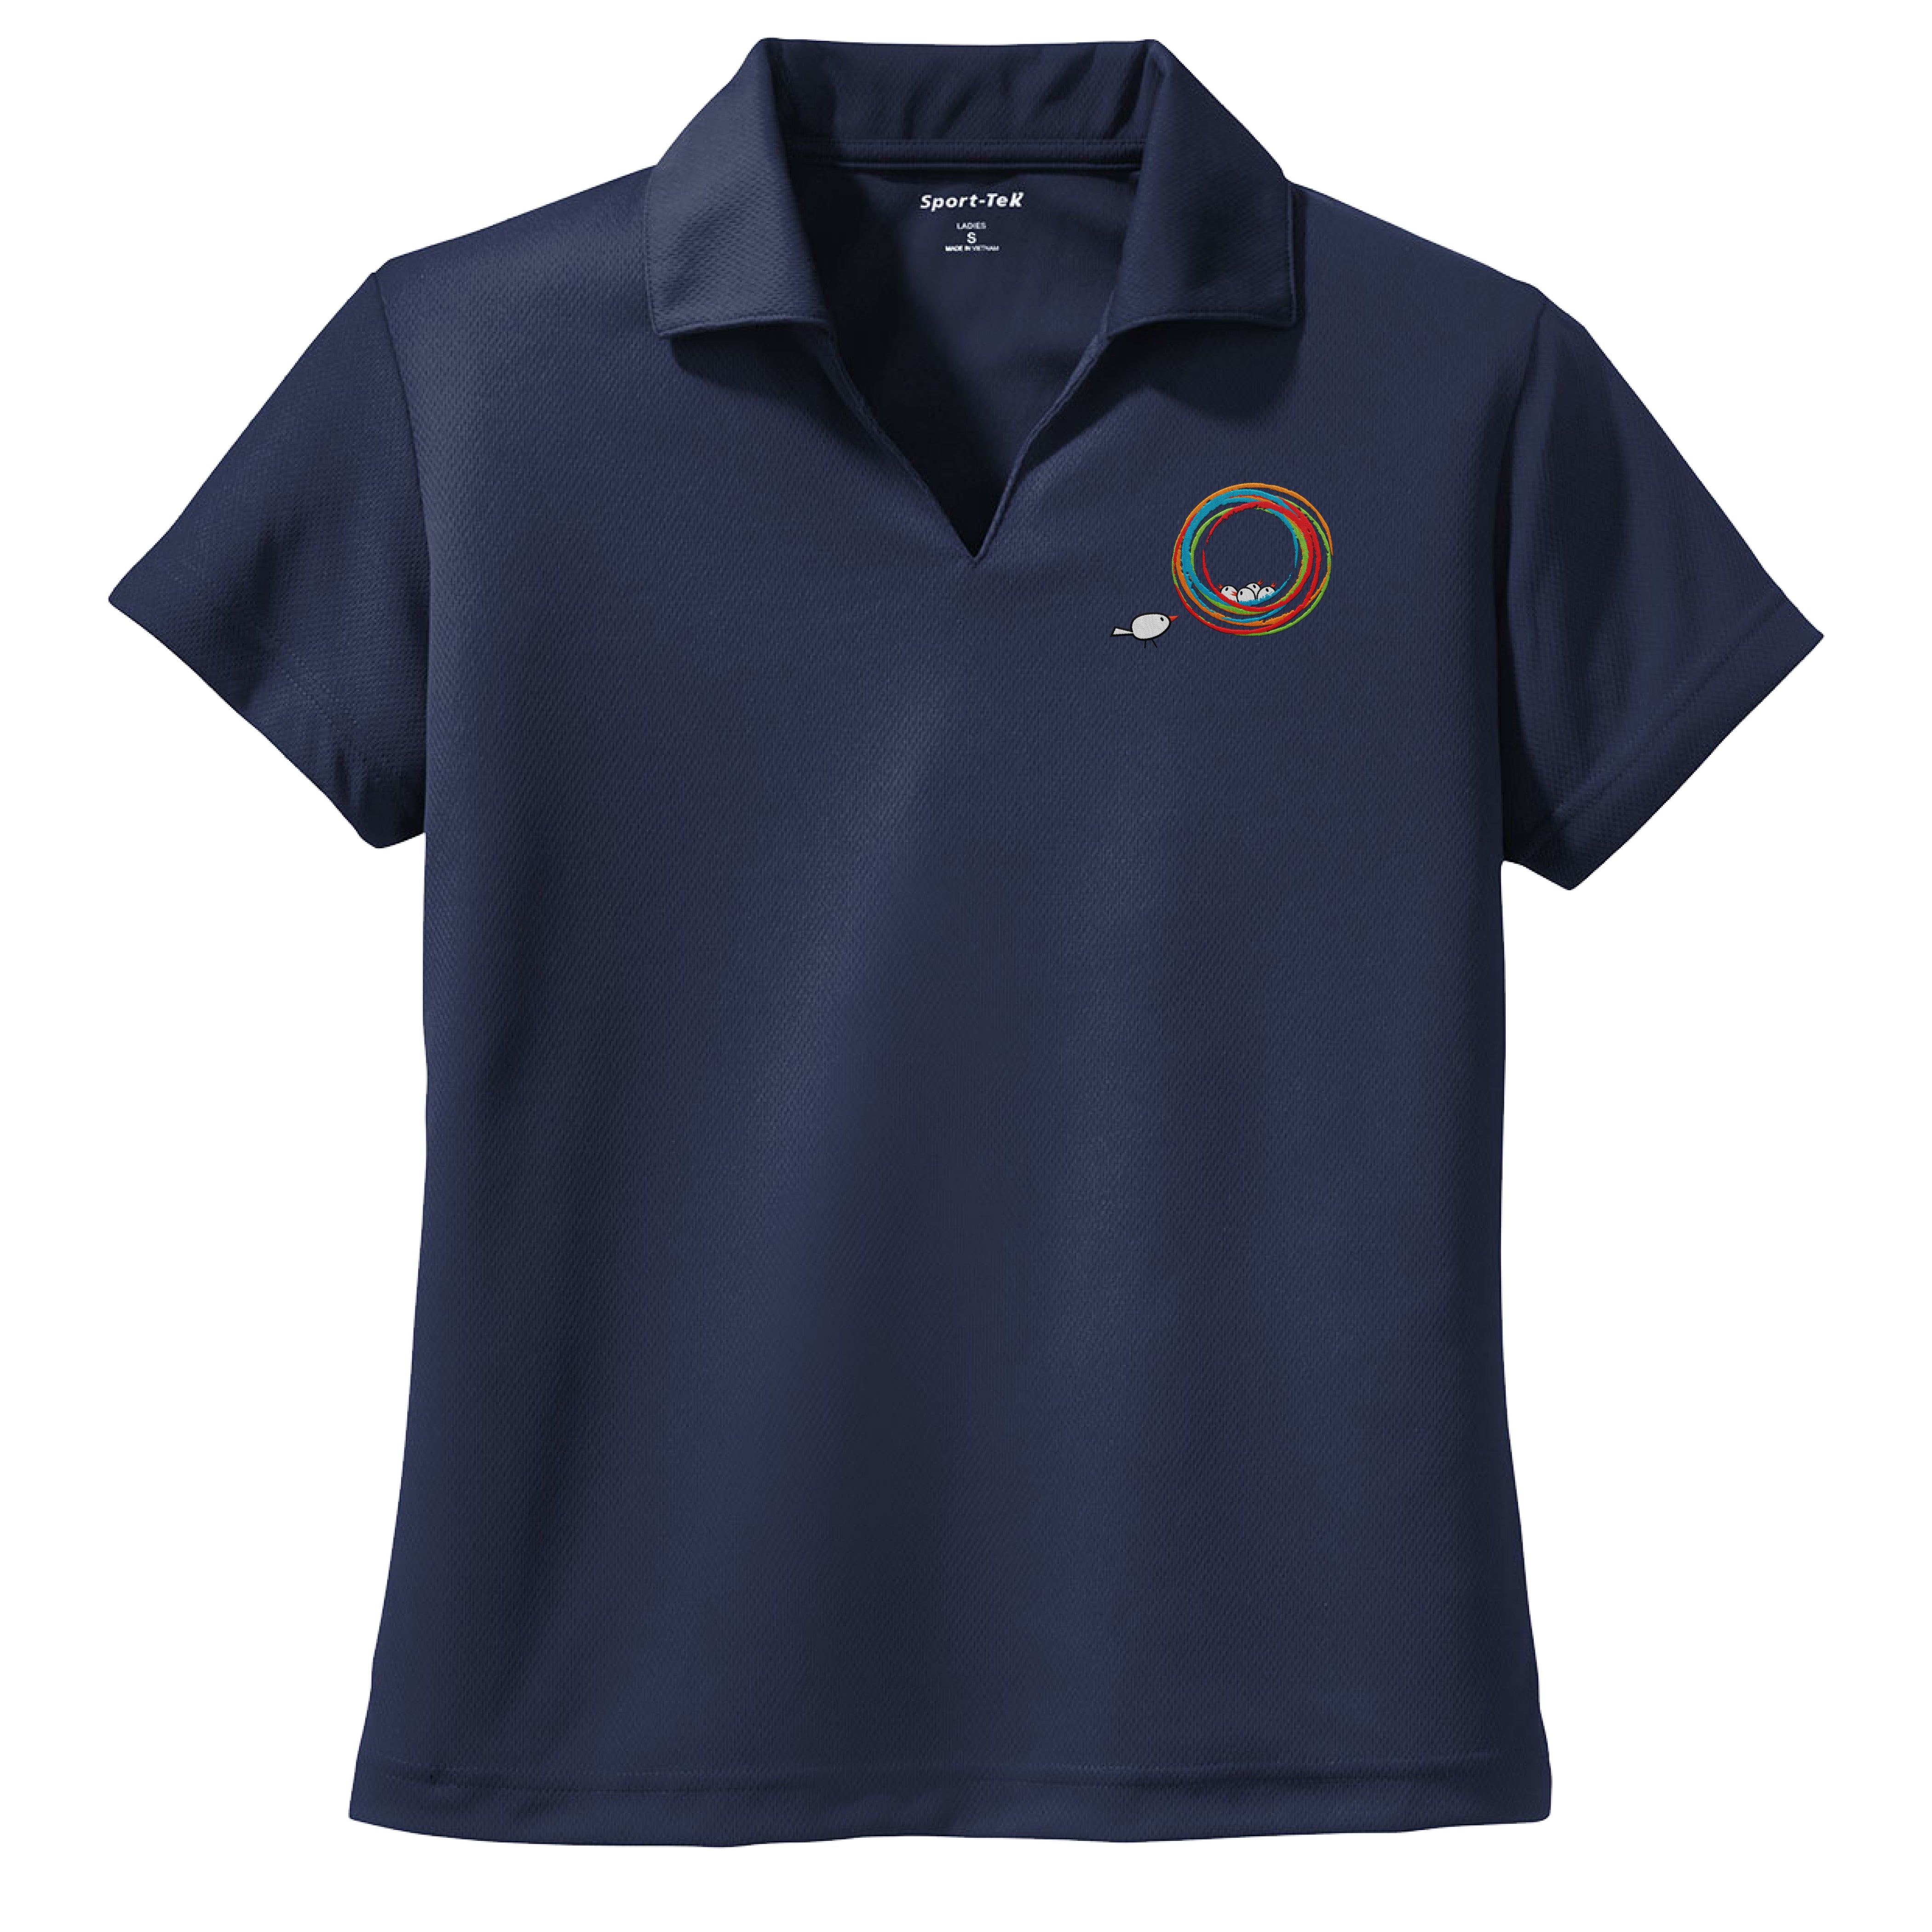 The Learning Nest - Women's Performance Polo